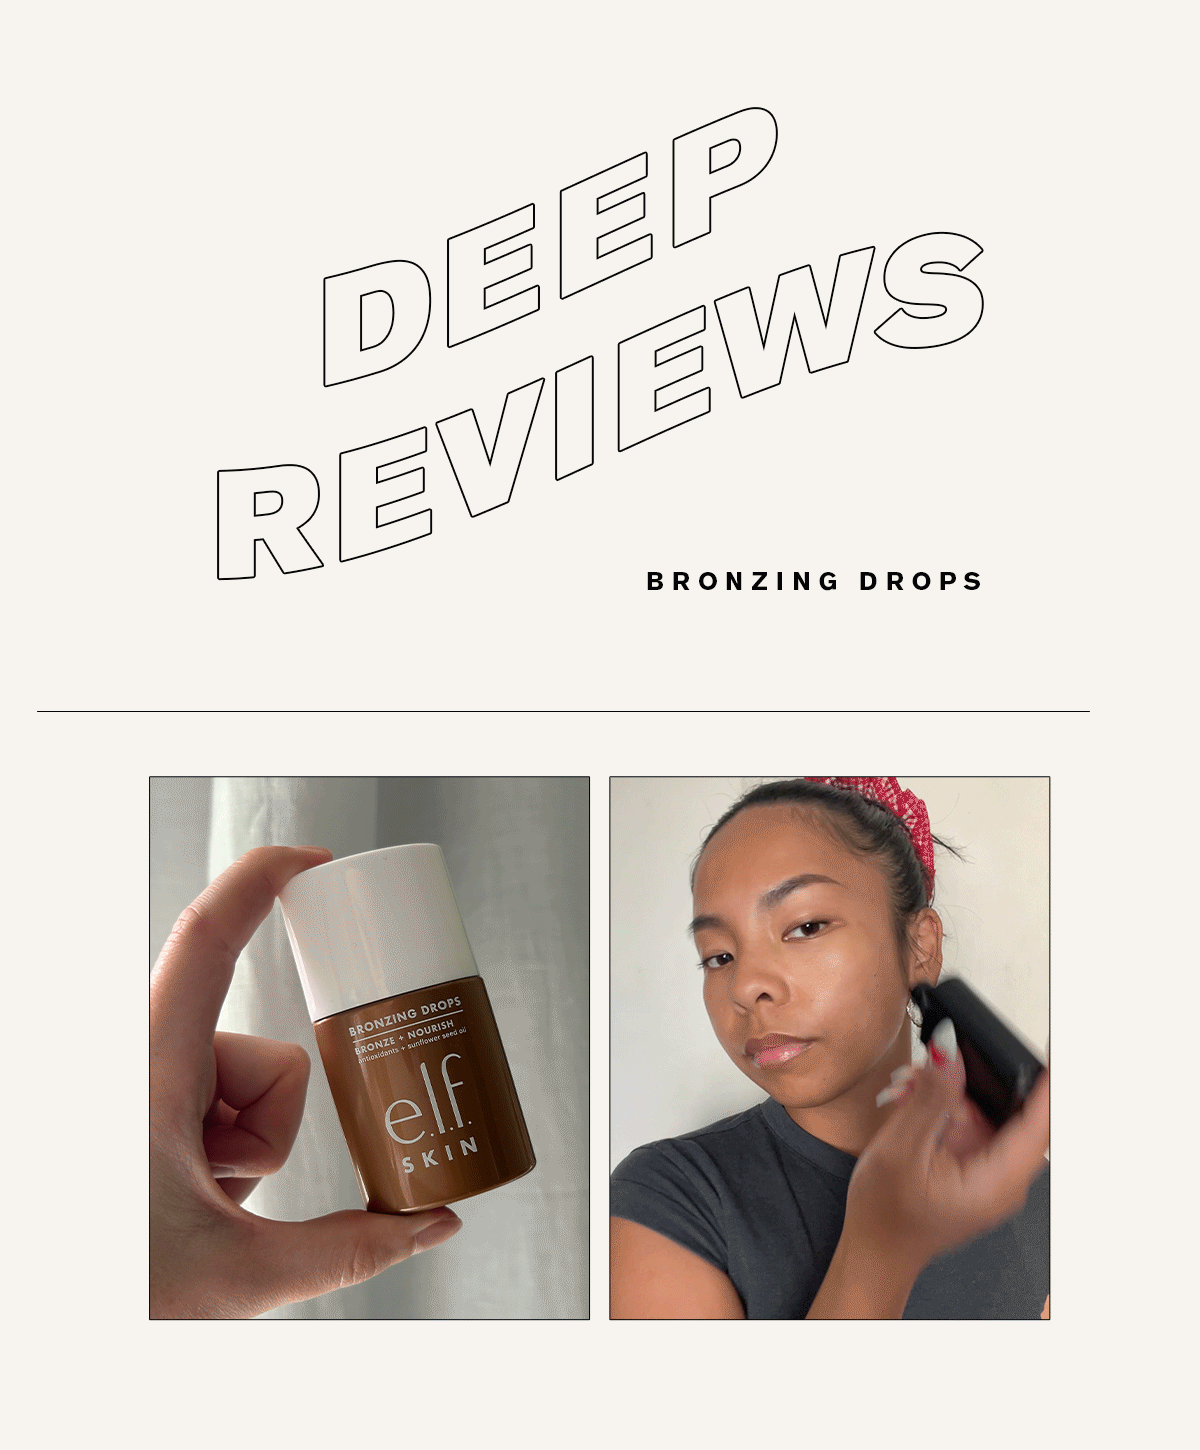 Introduction for our review of the best bronzing drops featuring E.l.f. Bronzing Drops and affiliates manager Jerrylyn Saguiped using Westman Atelier Illuminator